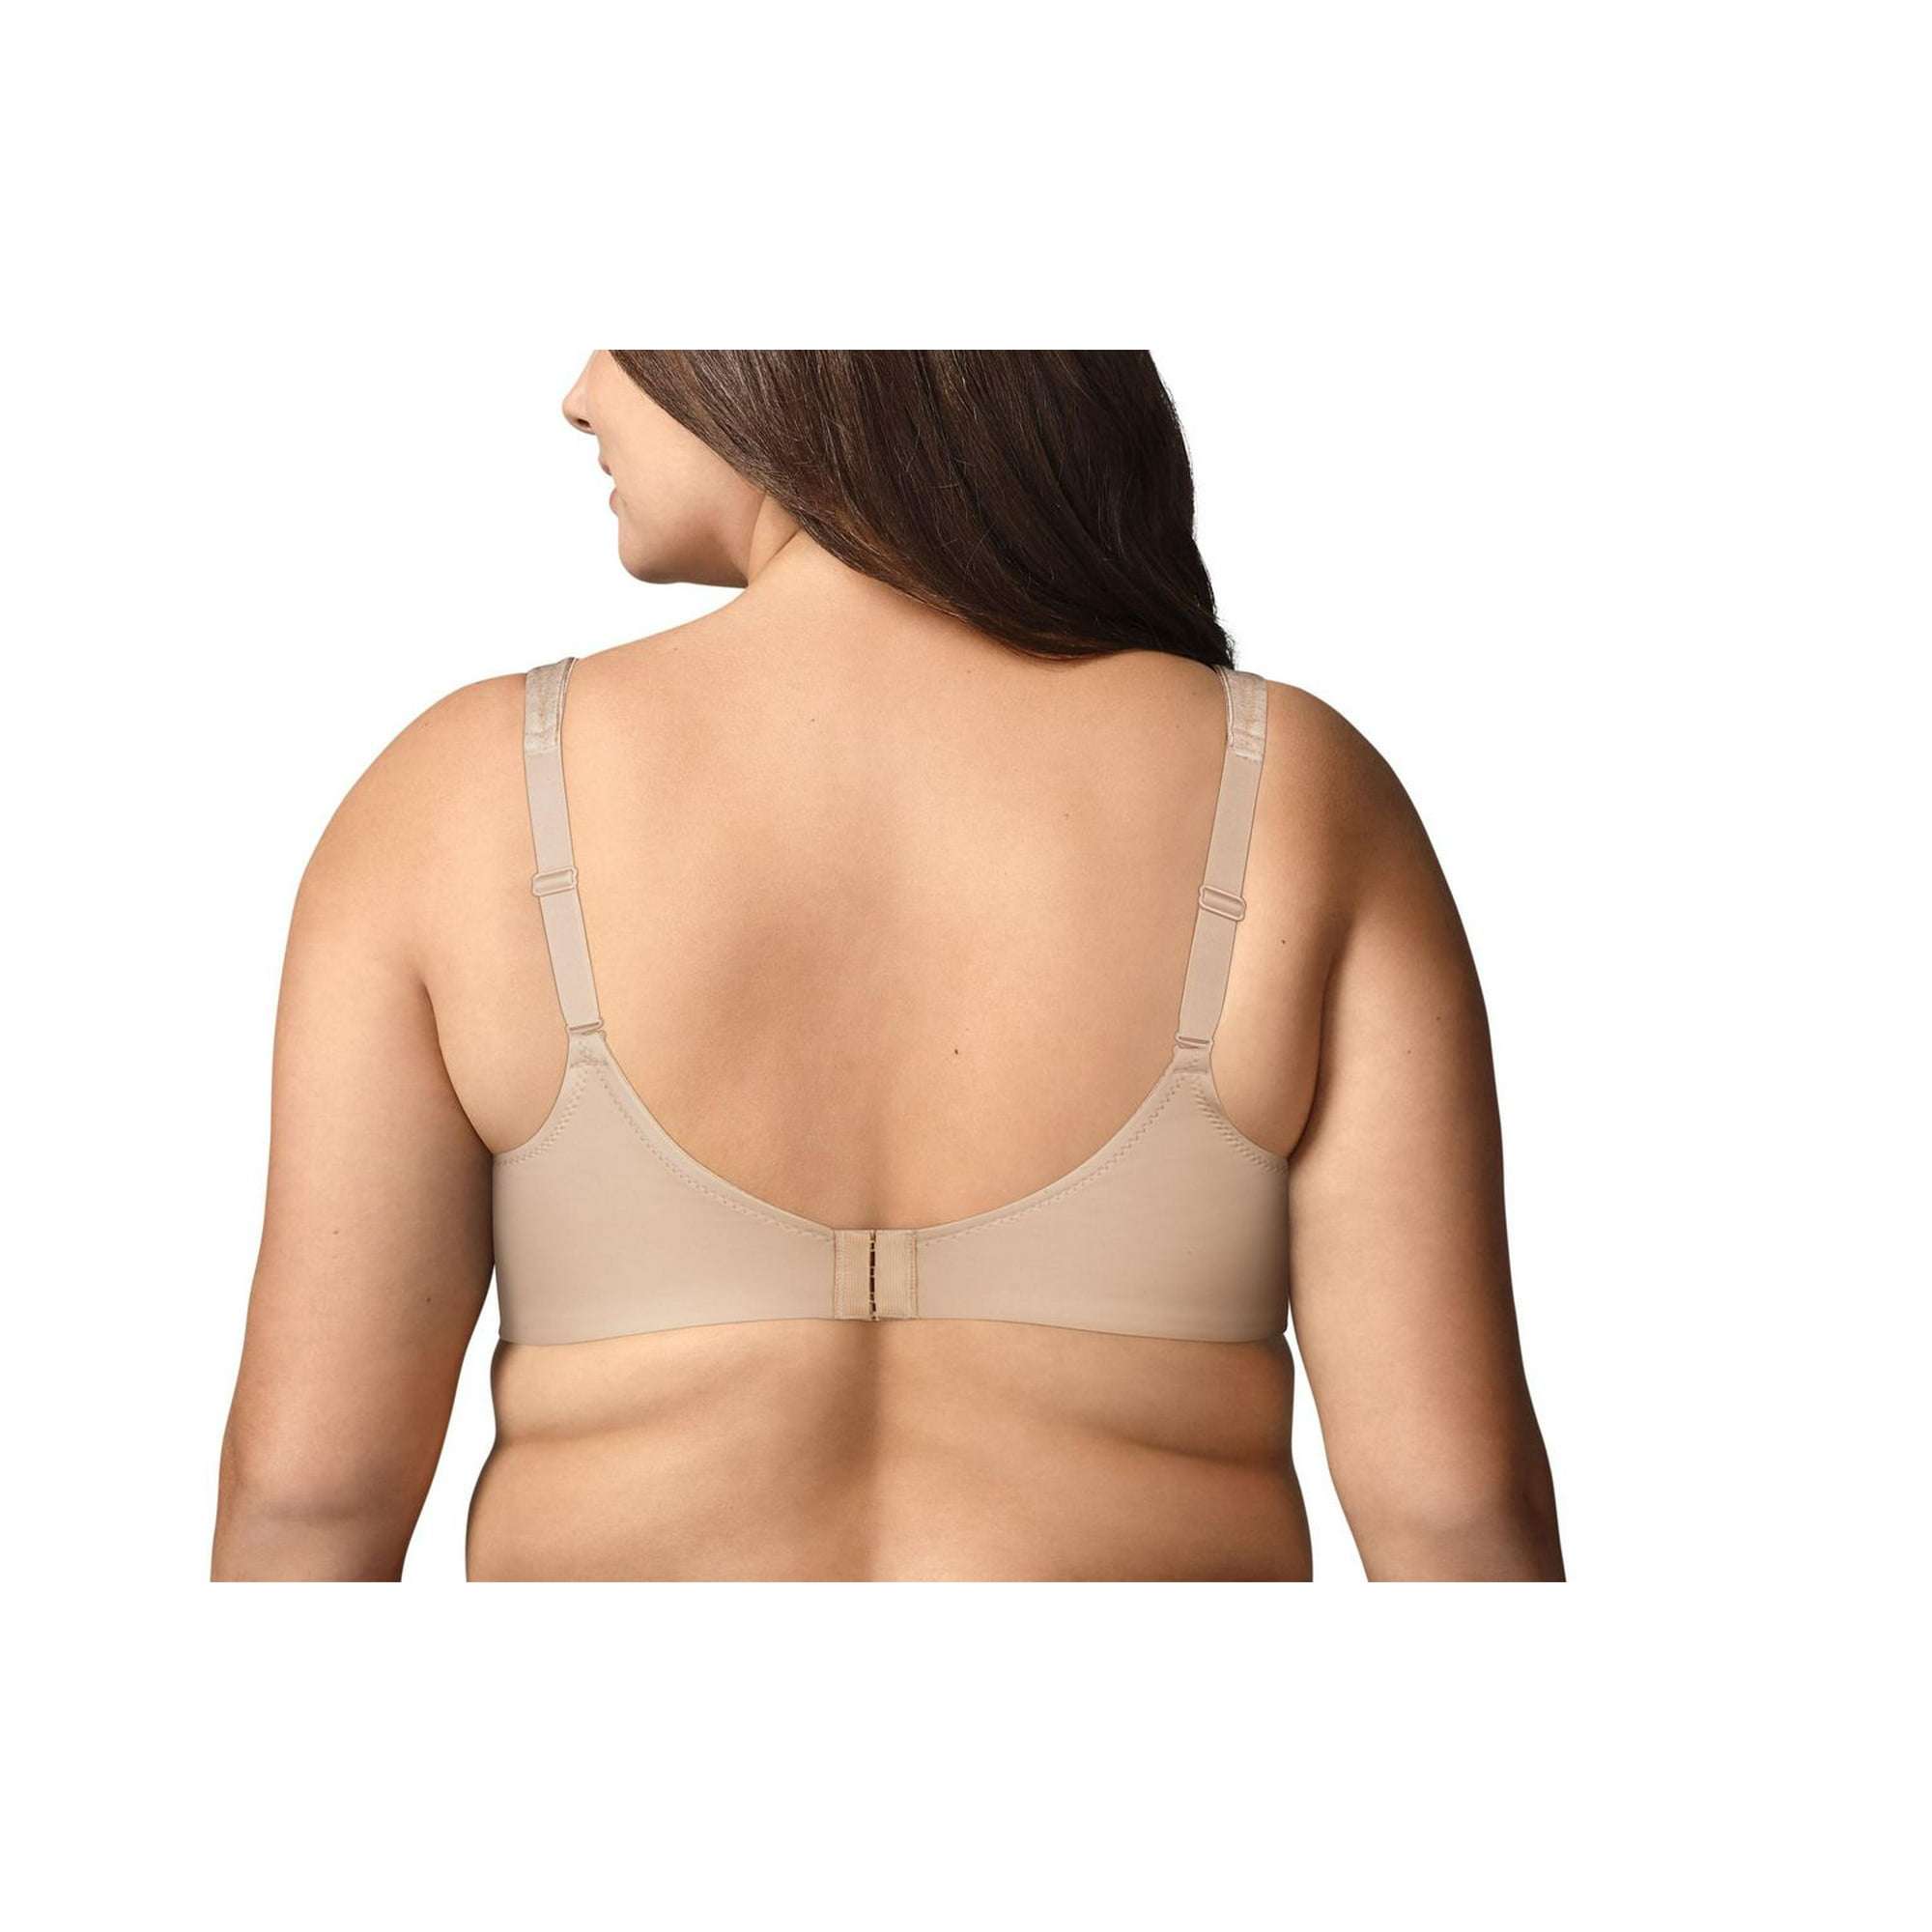 Lightly Lined Sleek Back Recycled Fibers Bra - Romantic floral